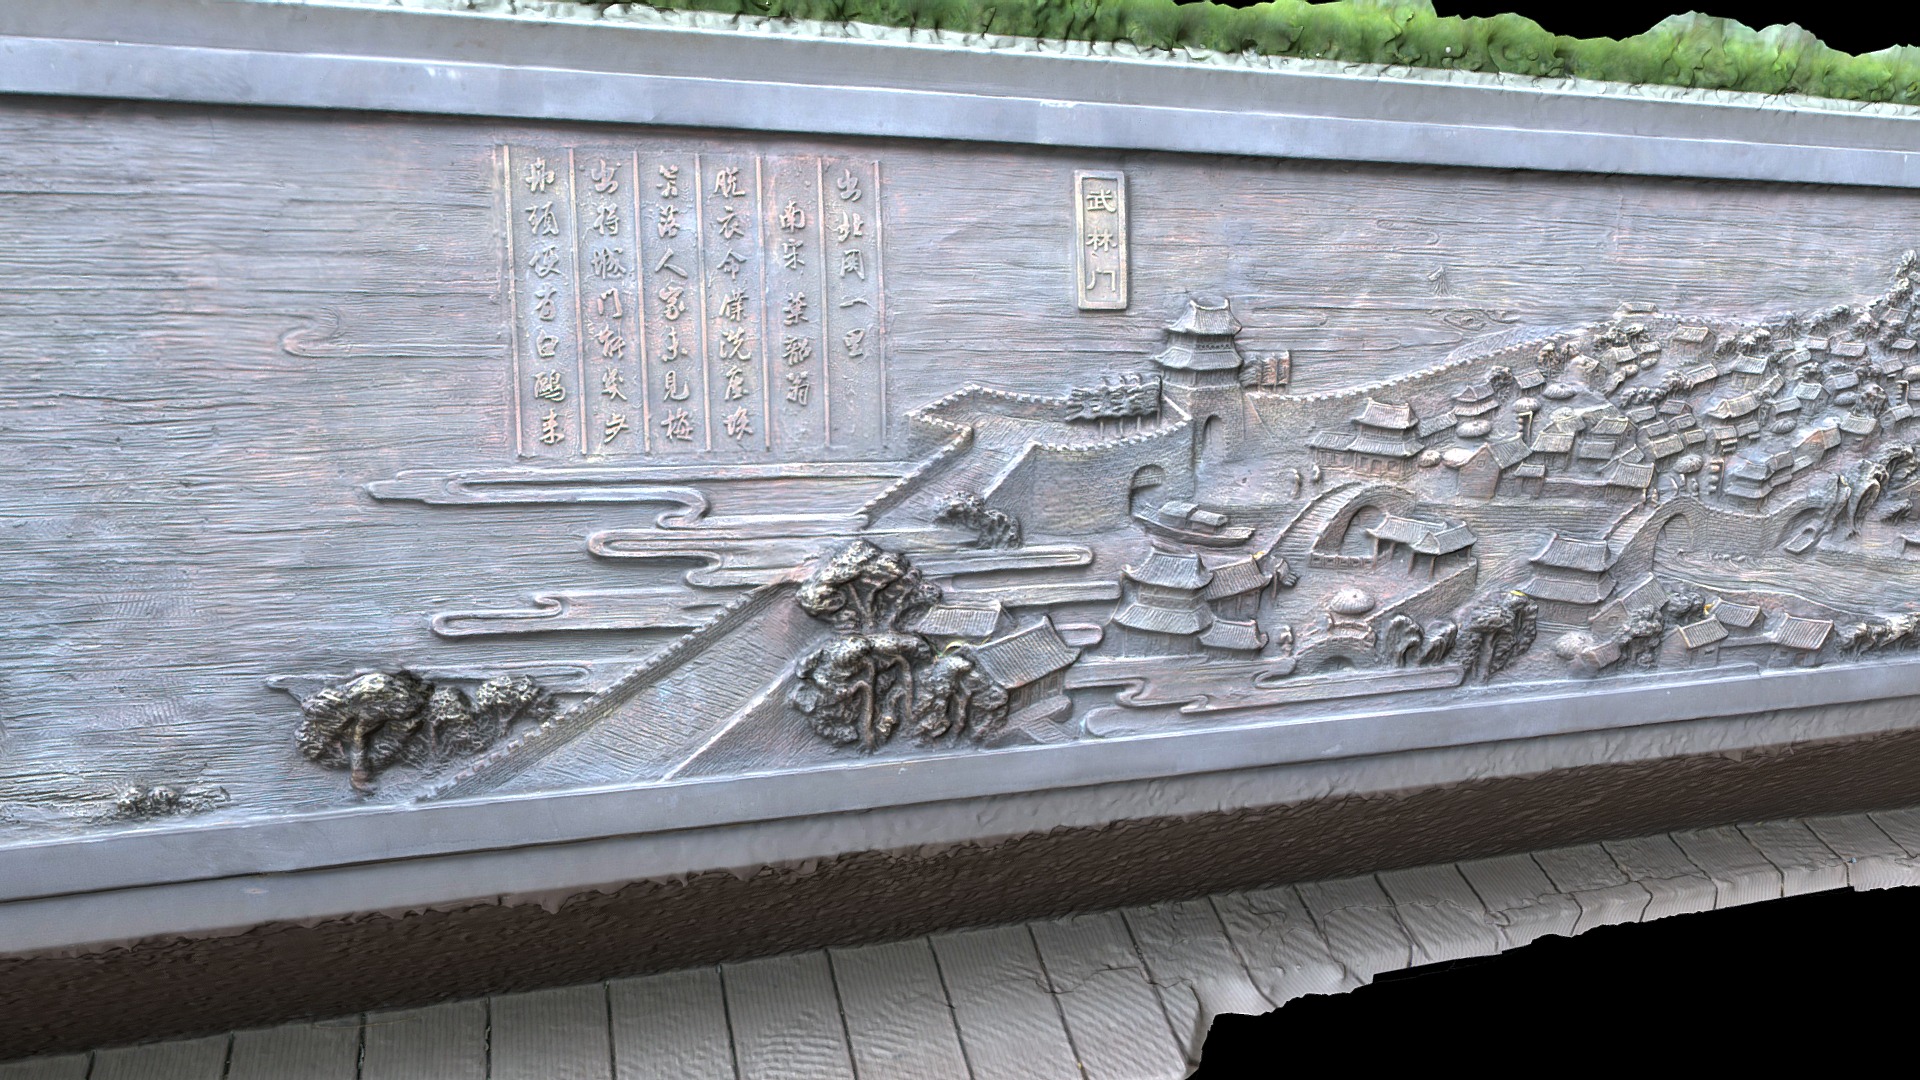 3D model 2018-09 – Beijing 38 - This is a 3D model of the 2018-09 - Beijing 38. The 3D model is about a stone wall with a statue on it.